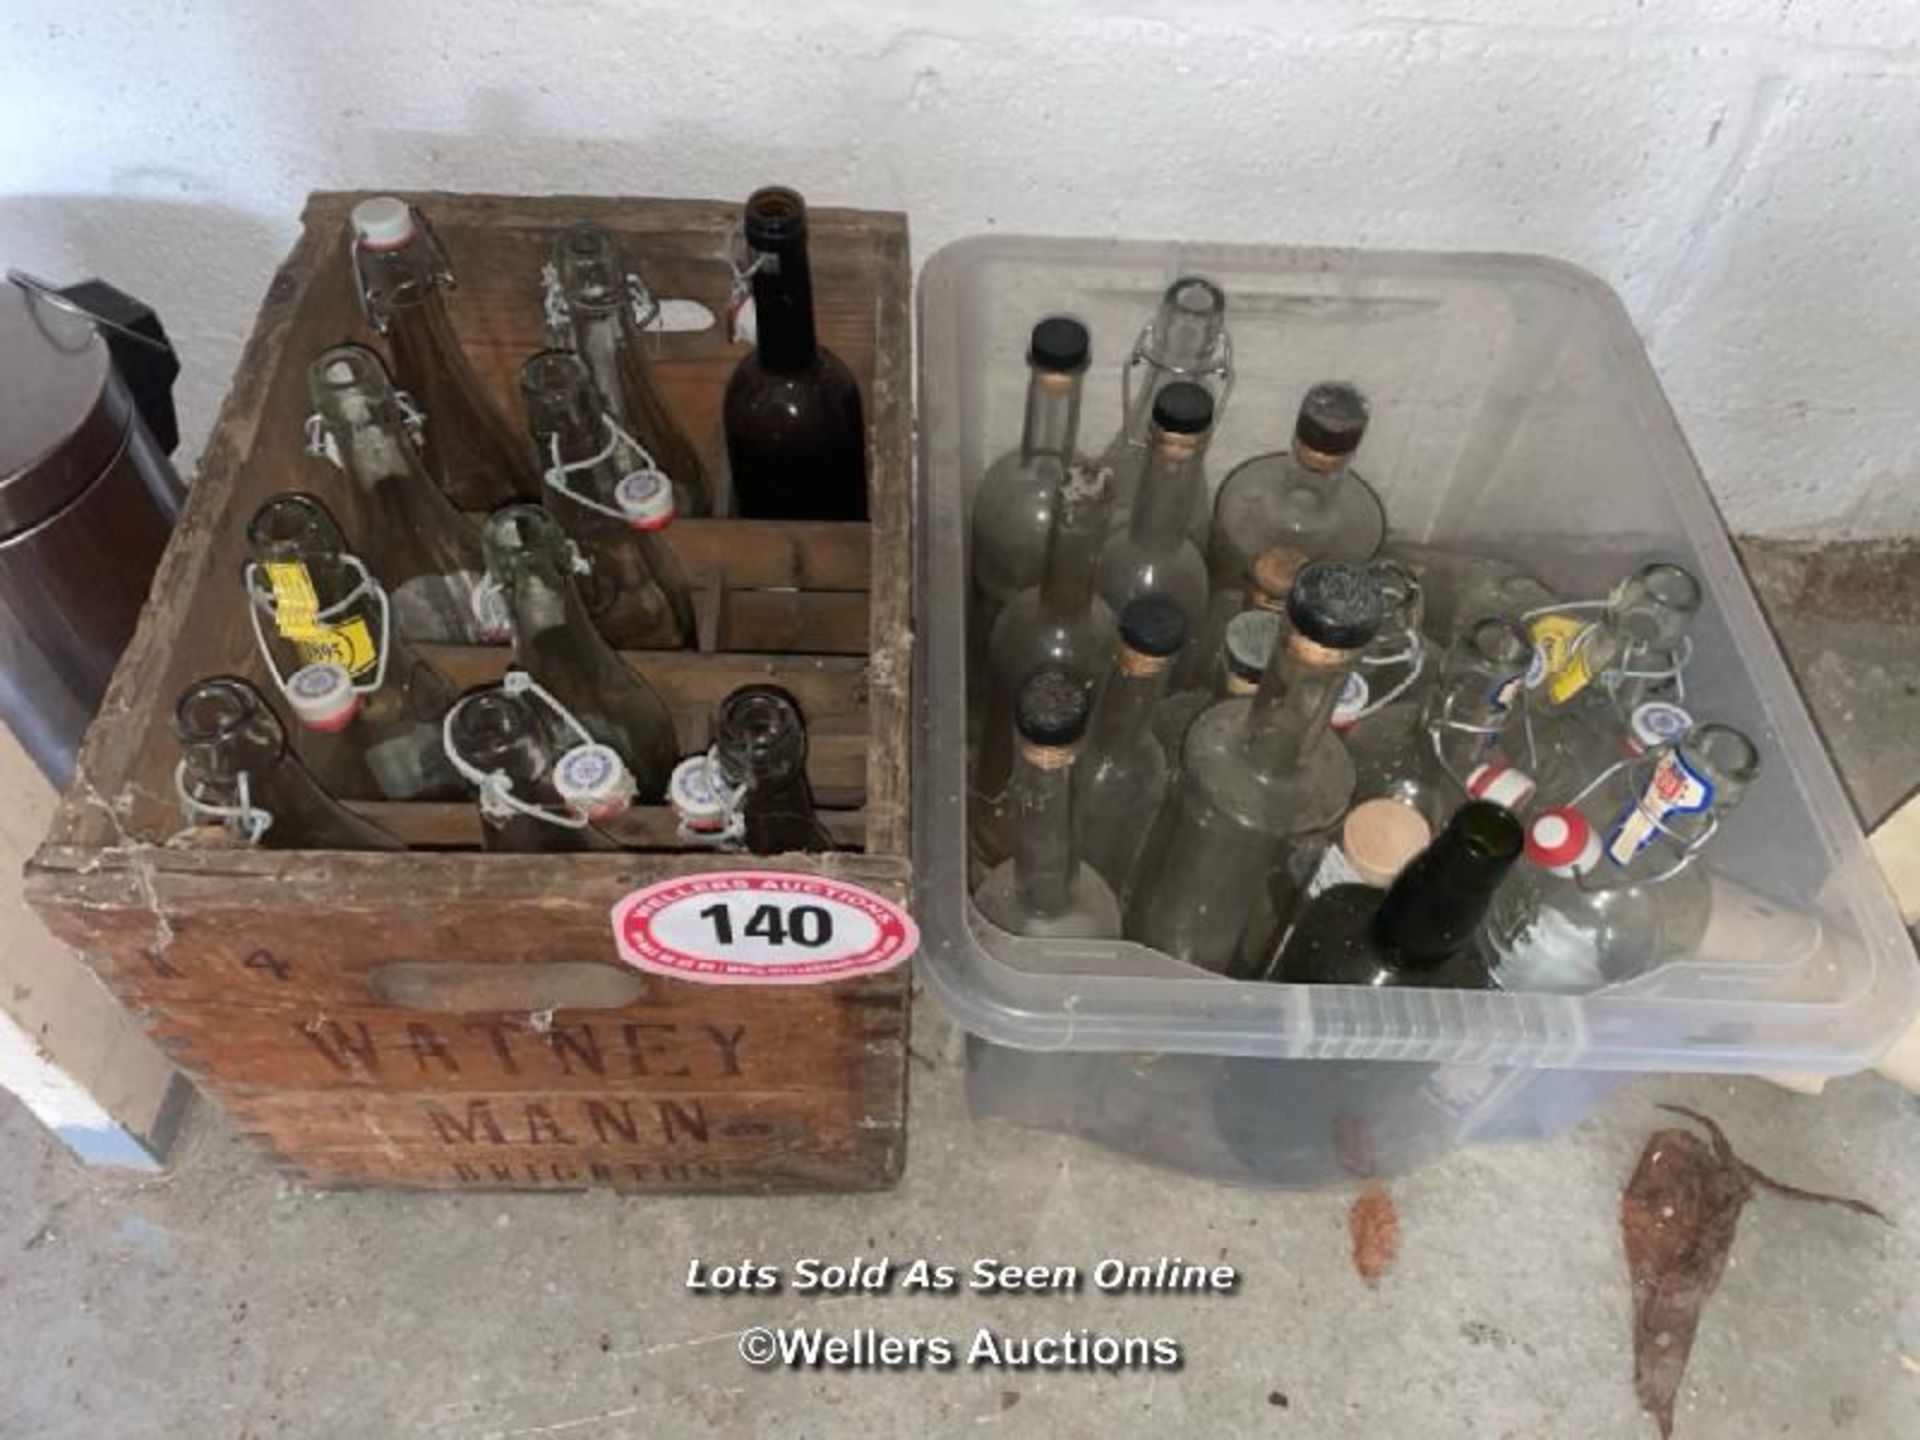 2X CRATES OF VINTAGE GLASS BOTTLES, ONE CRATE IS WATNEY MAN BRIGHTON